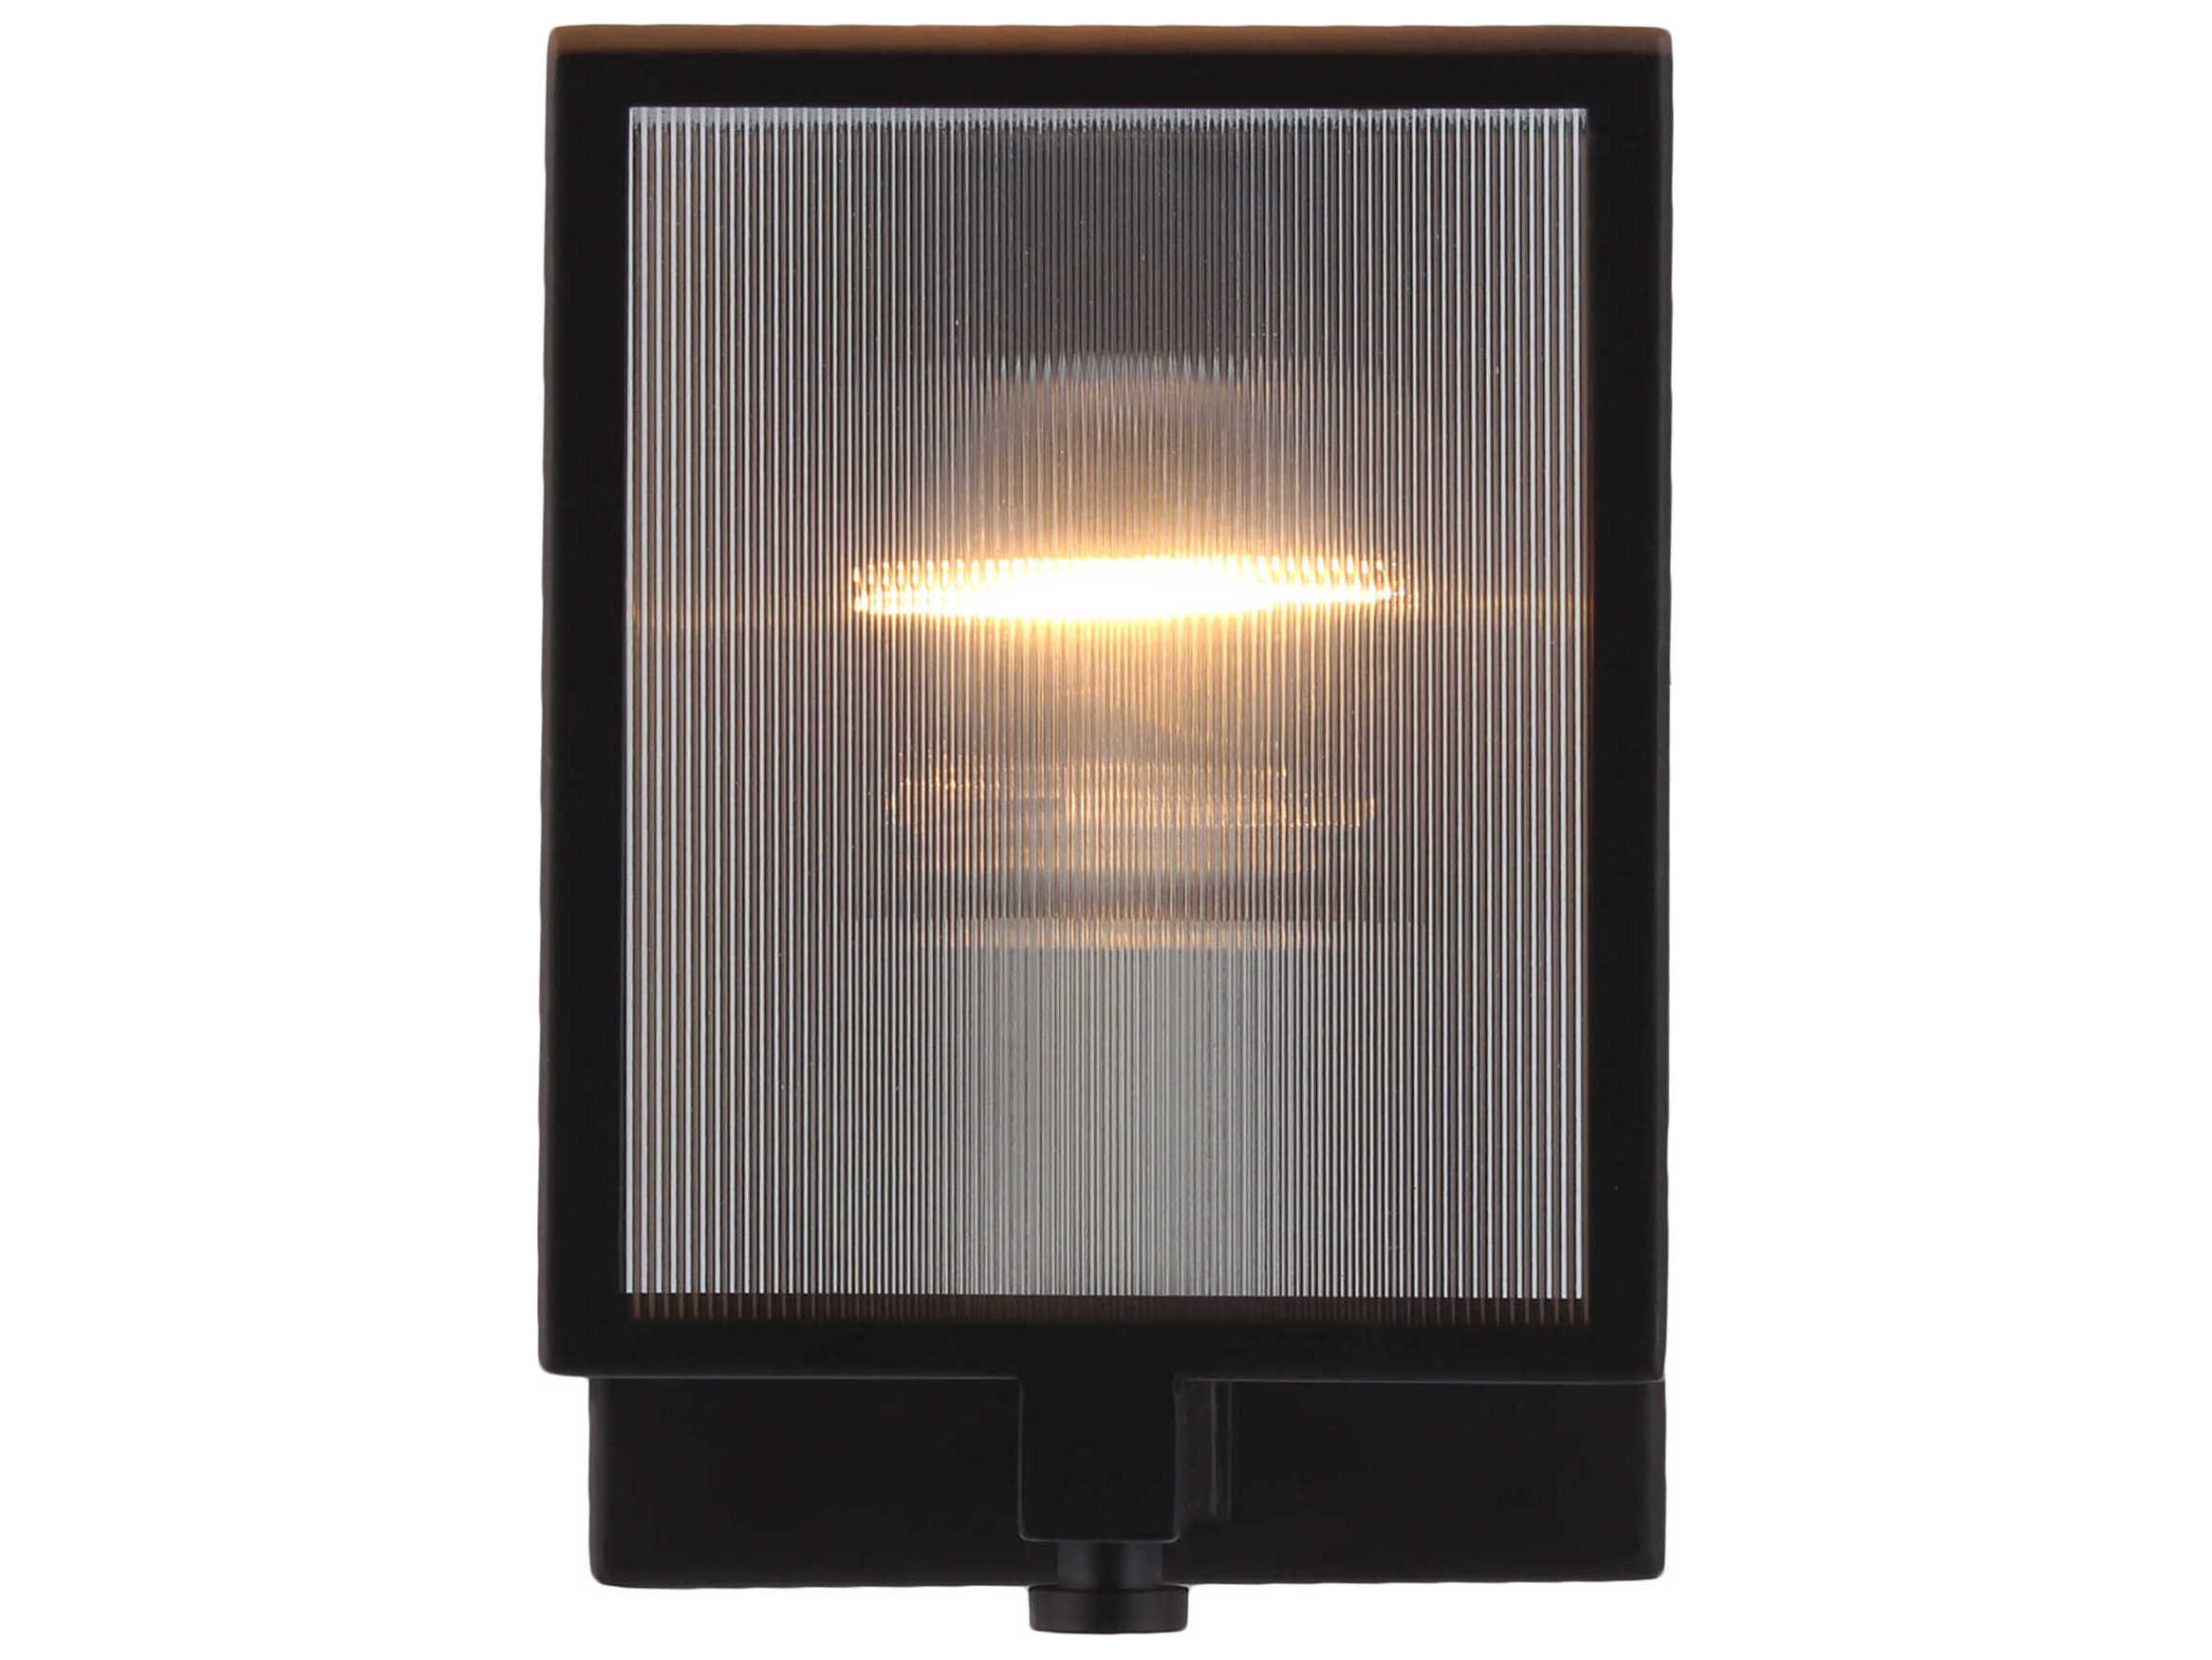 Eglo Henessy Black Brushed Nickel Glass Wall Sconce Egl203727a